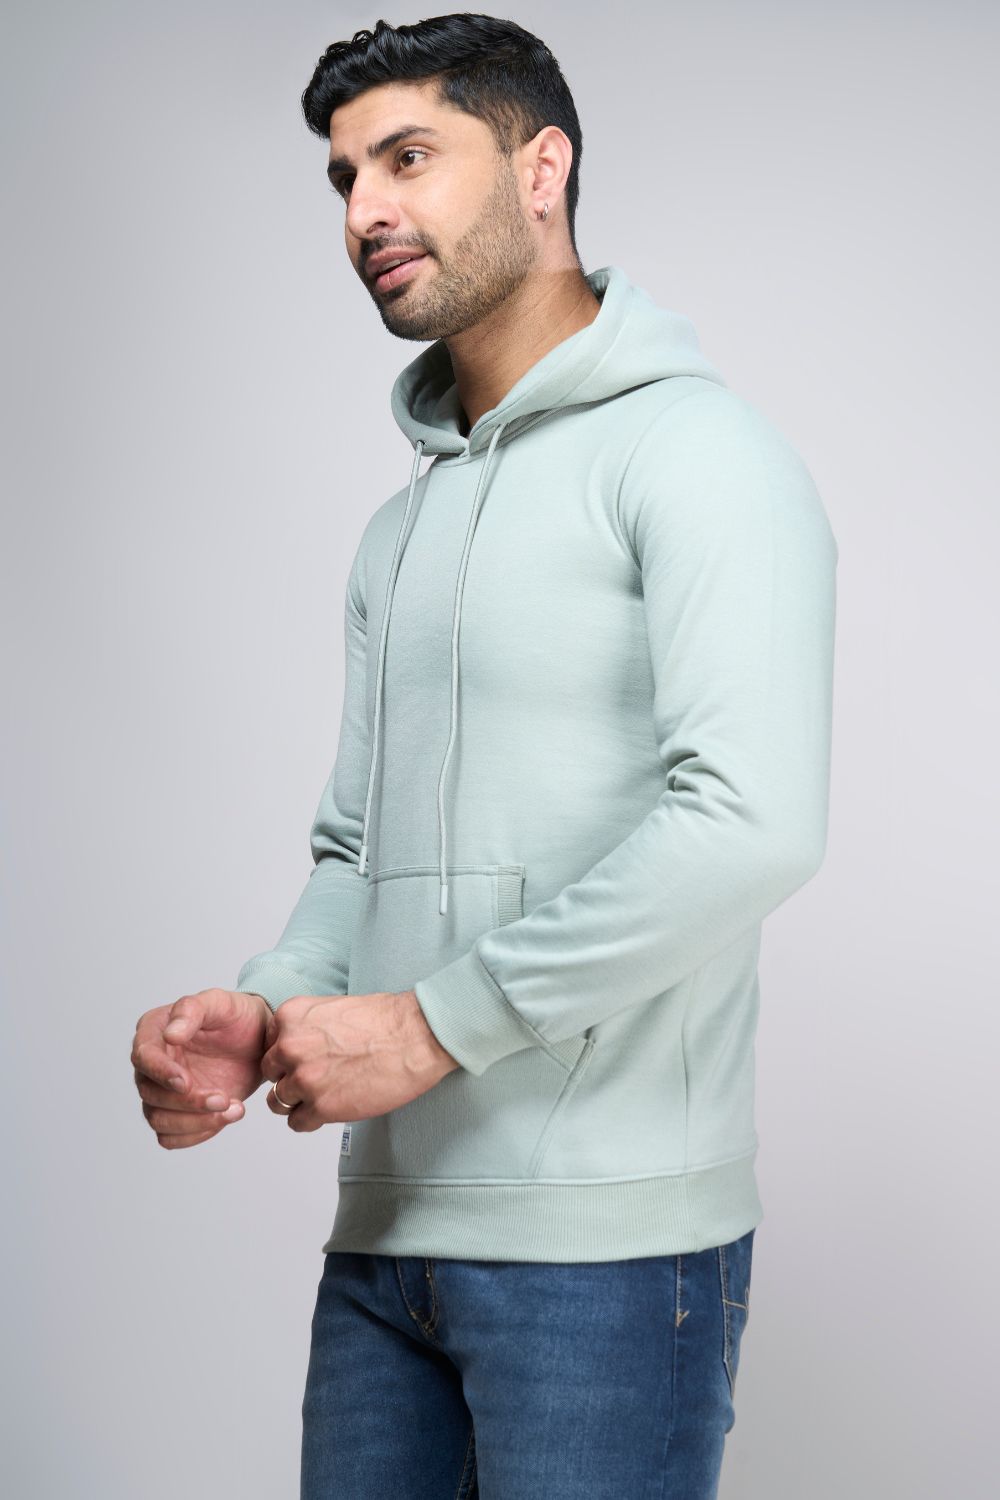 Sea Green colored, hoodie for men with full sleeves and relaxed fit, side view.